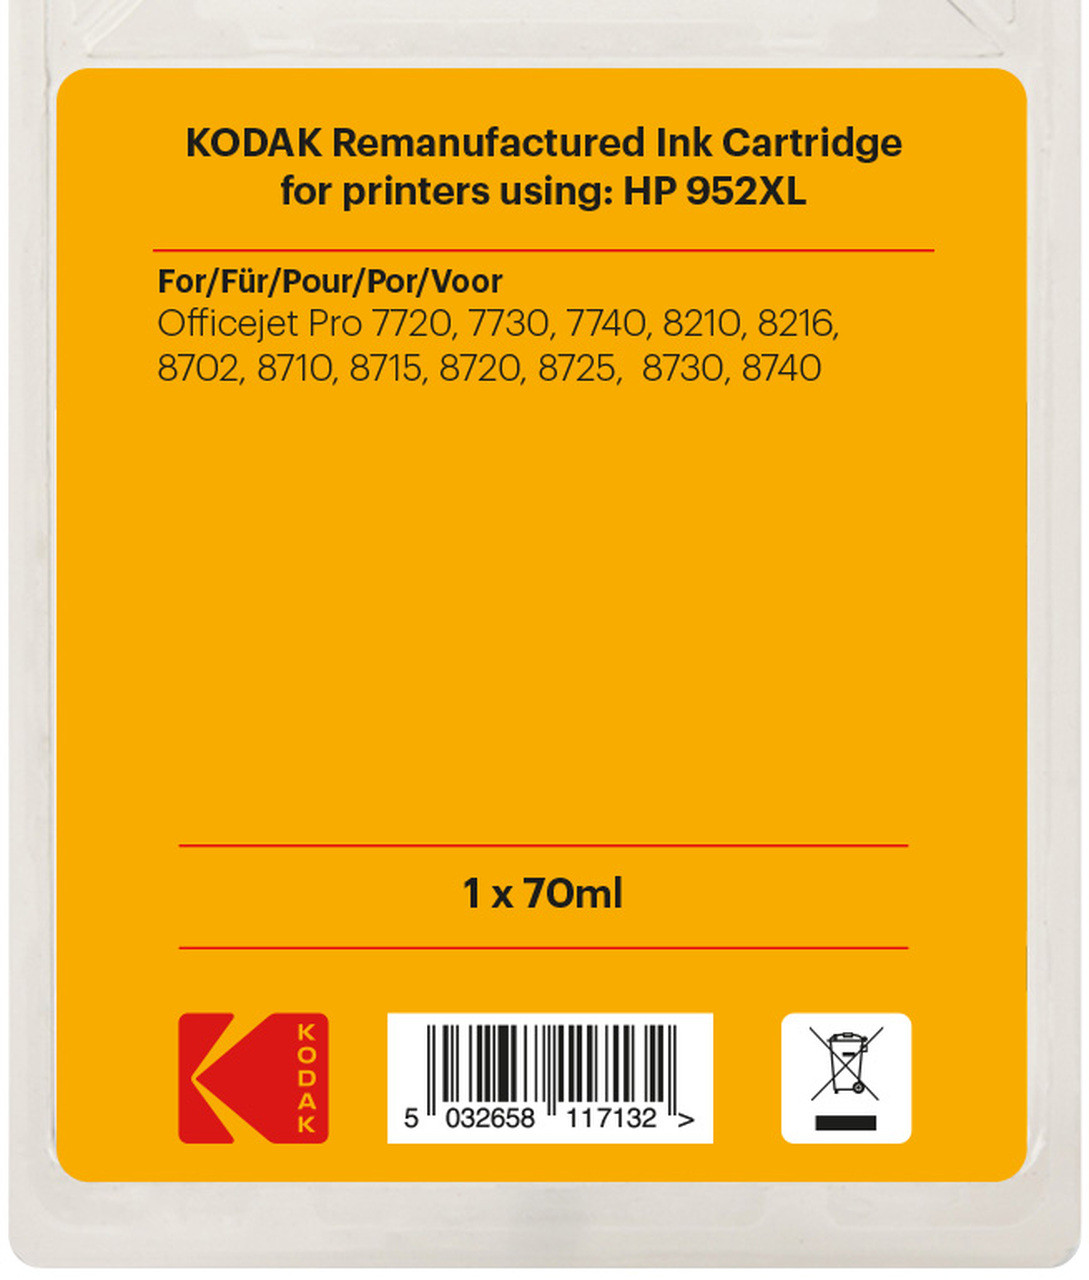  HP 952XL Yellow High-yield Ink Cartridge, Works with HP  OfficeJet 8702, HP OfficeJet Pro 7720, 7740, 8210, 8710, 8720, 8730, 8740  Series, Eligible for Instant Ink